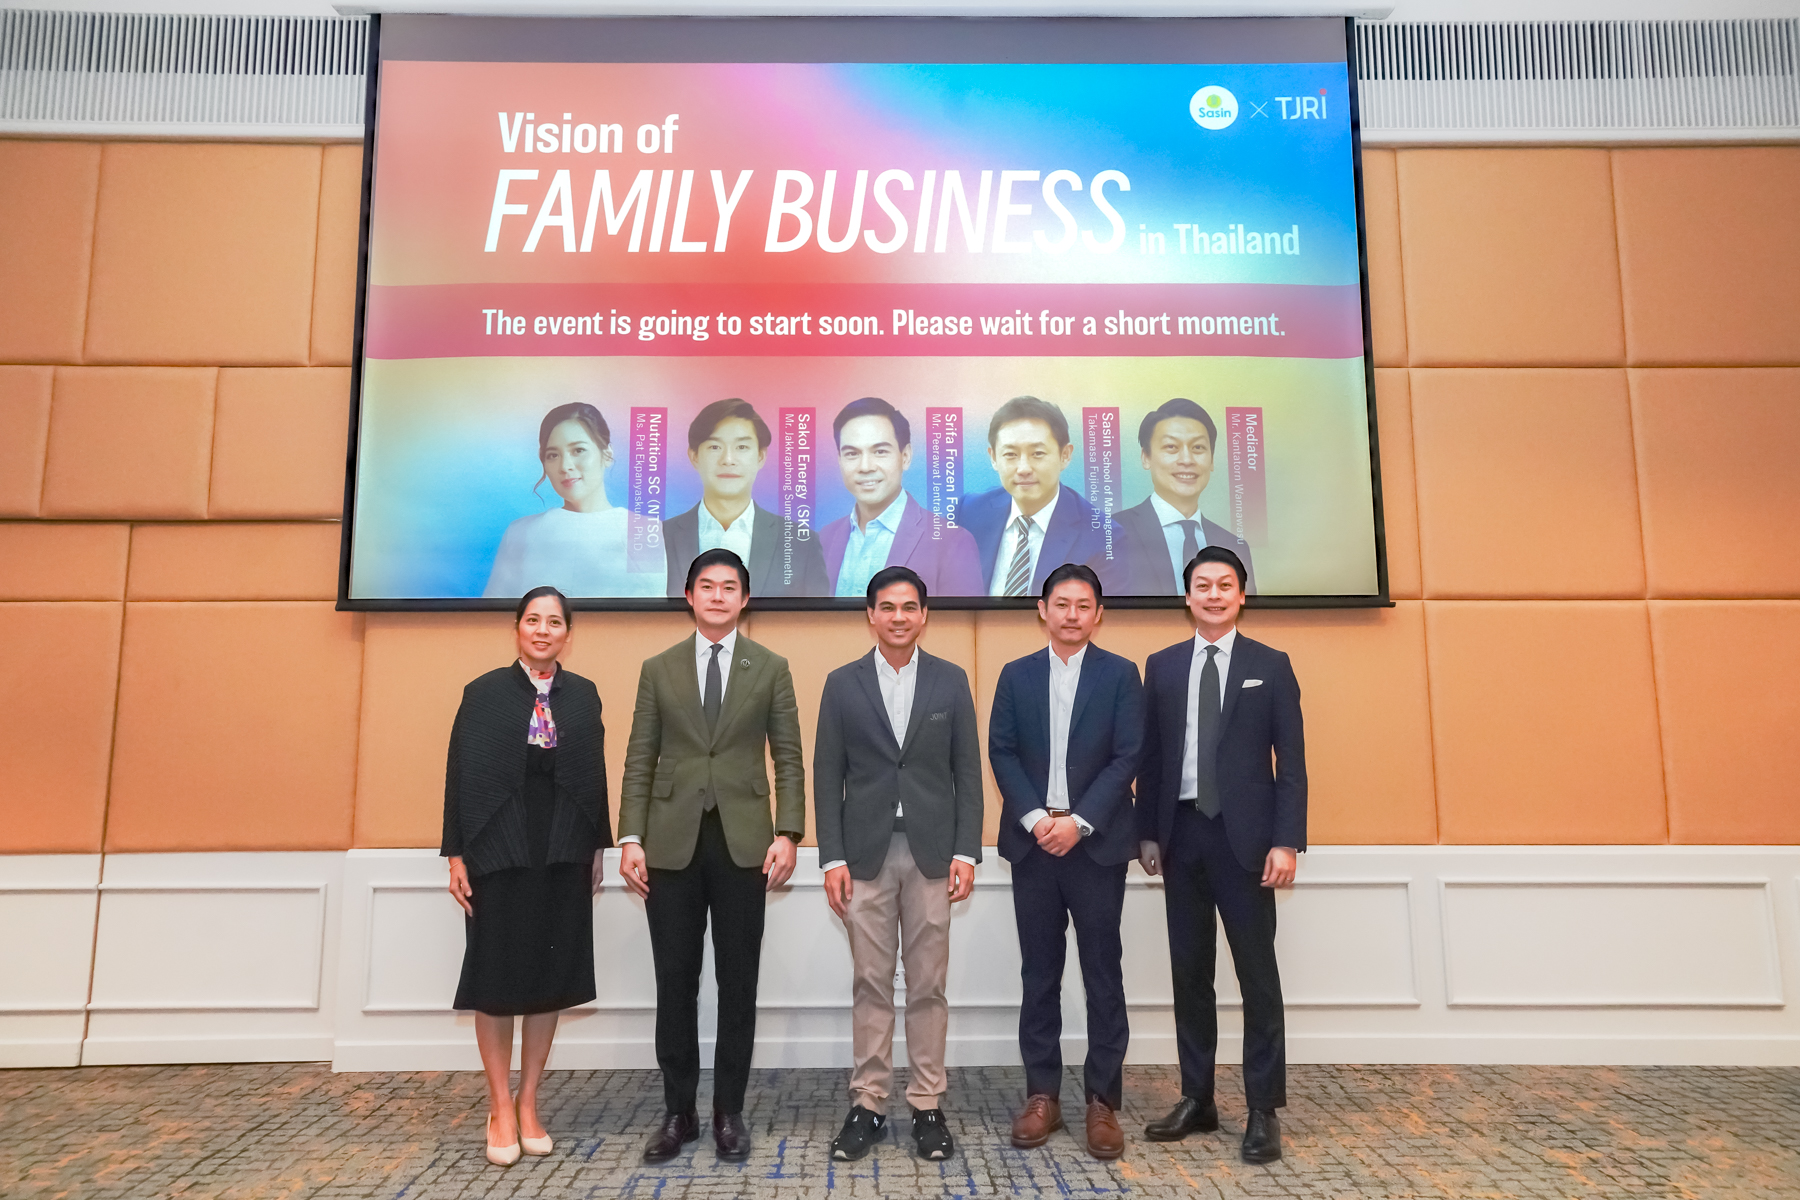 Vision of Family Business inThailand